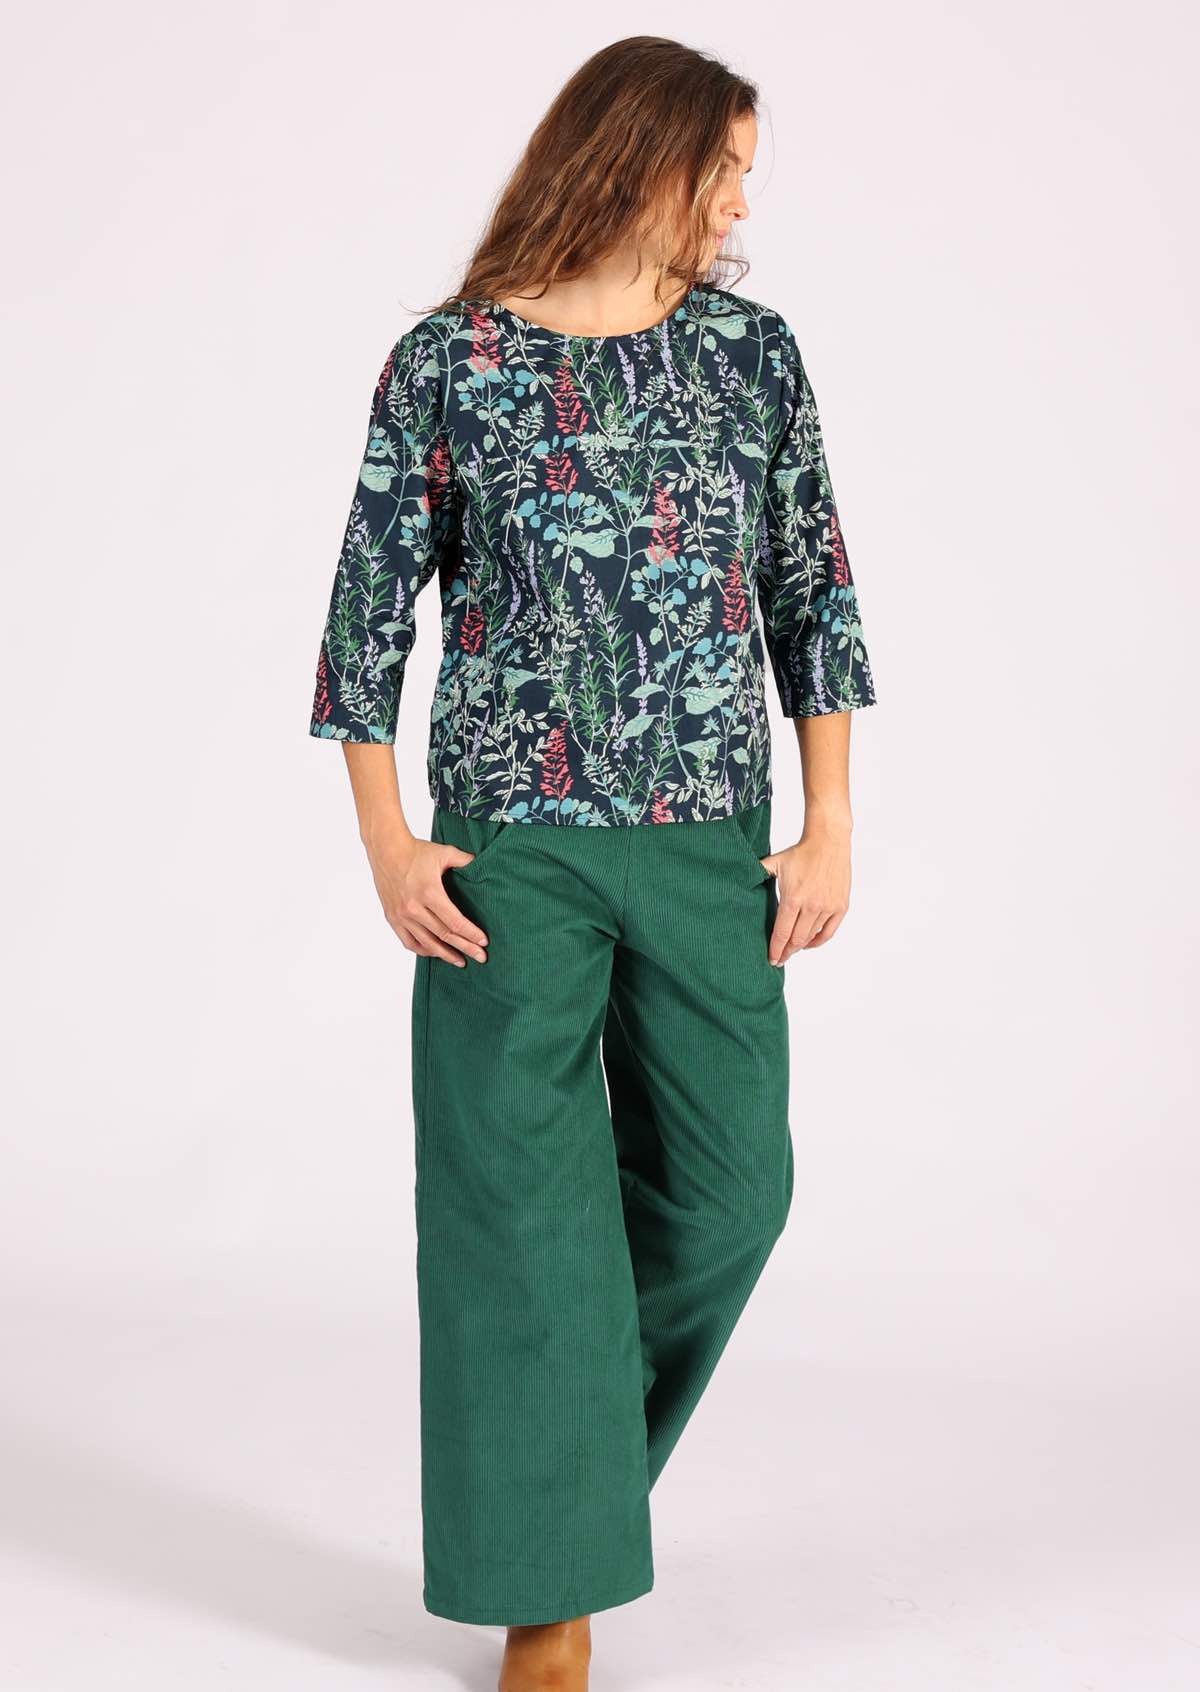 Cotton relaxed fit top with 3/4 sleeves and high round neckline